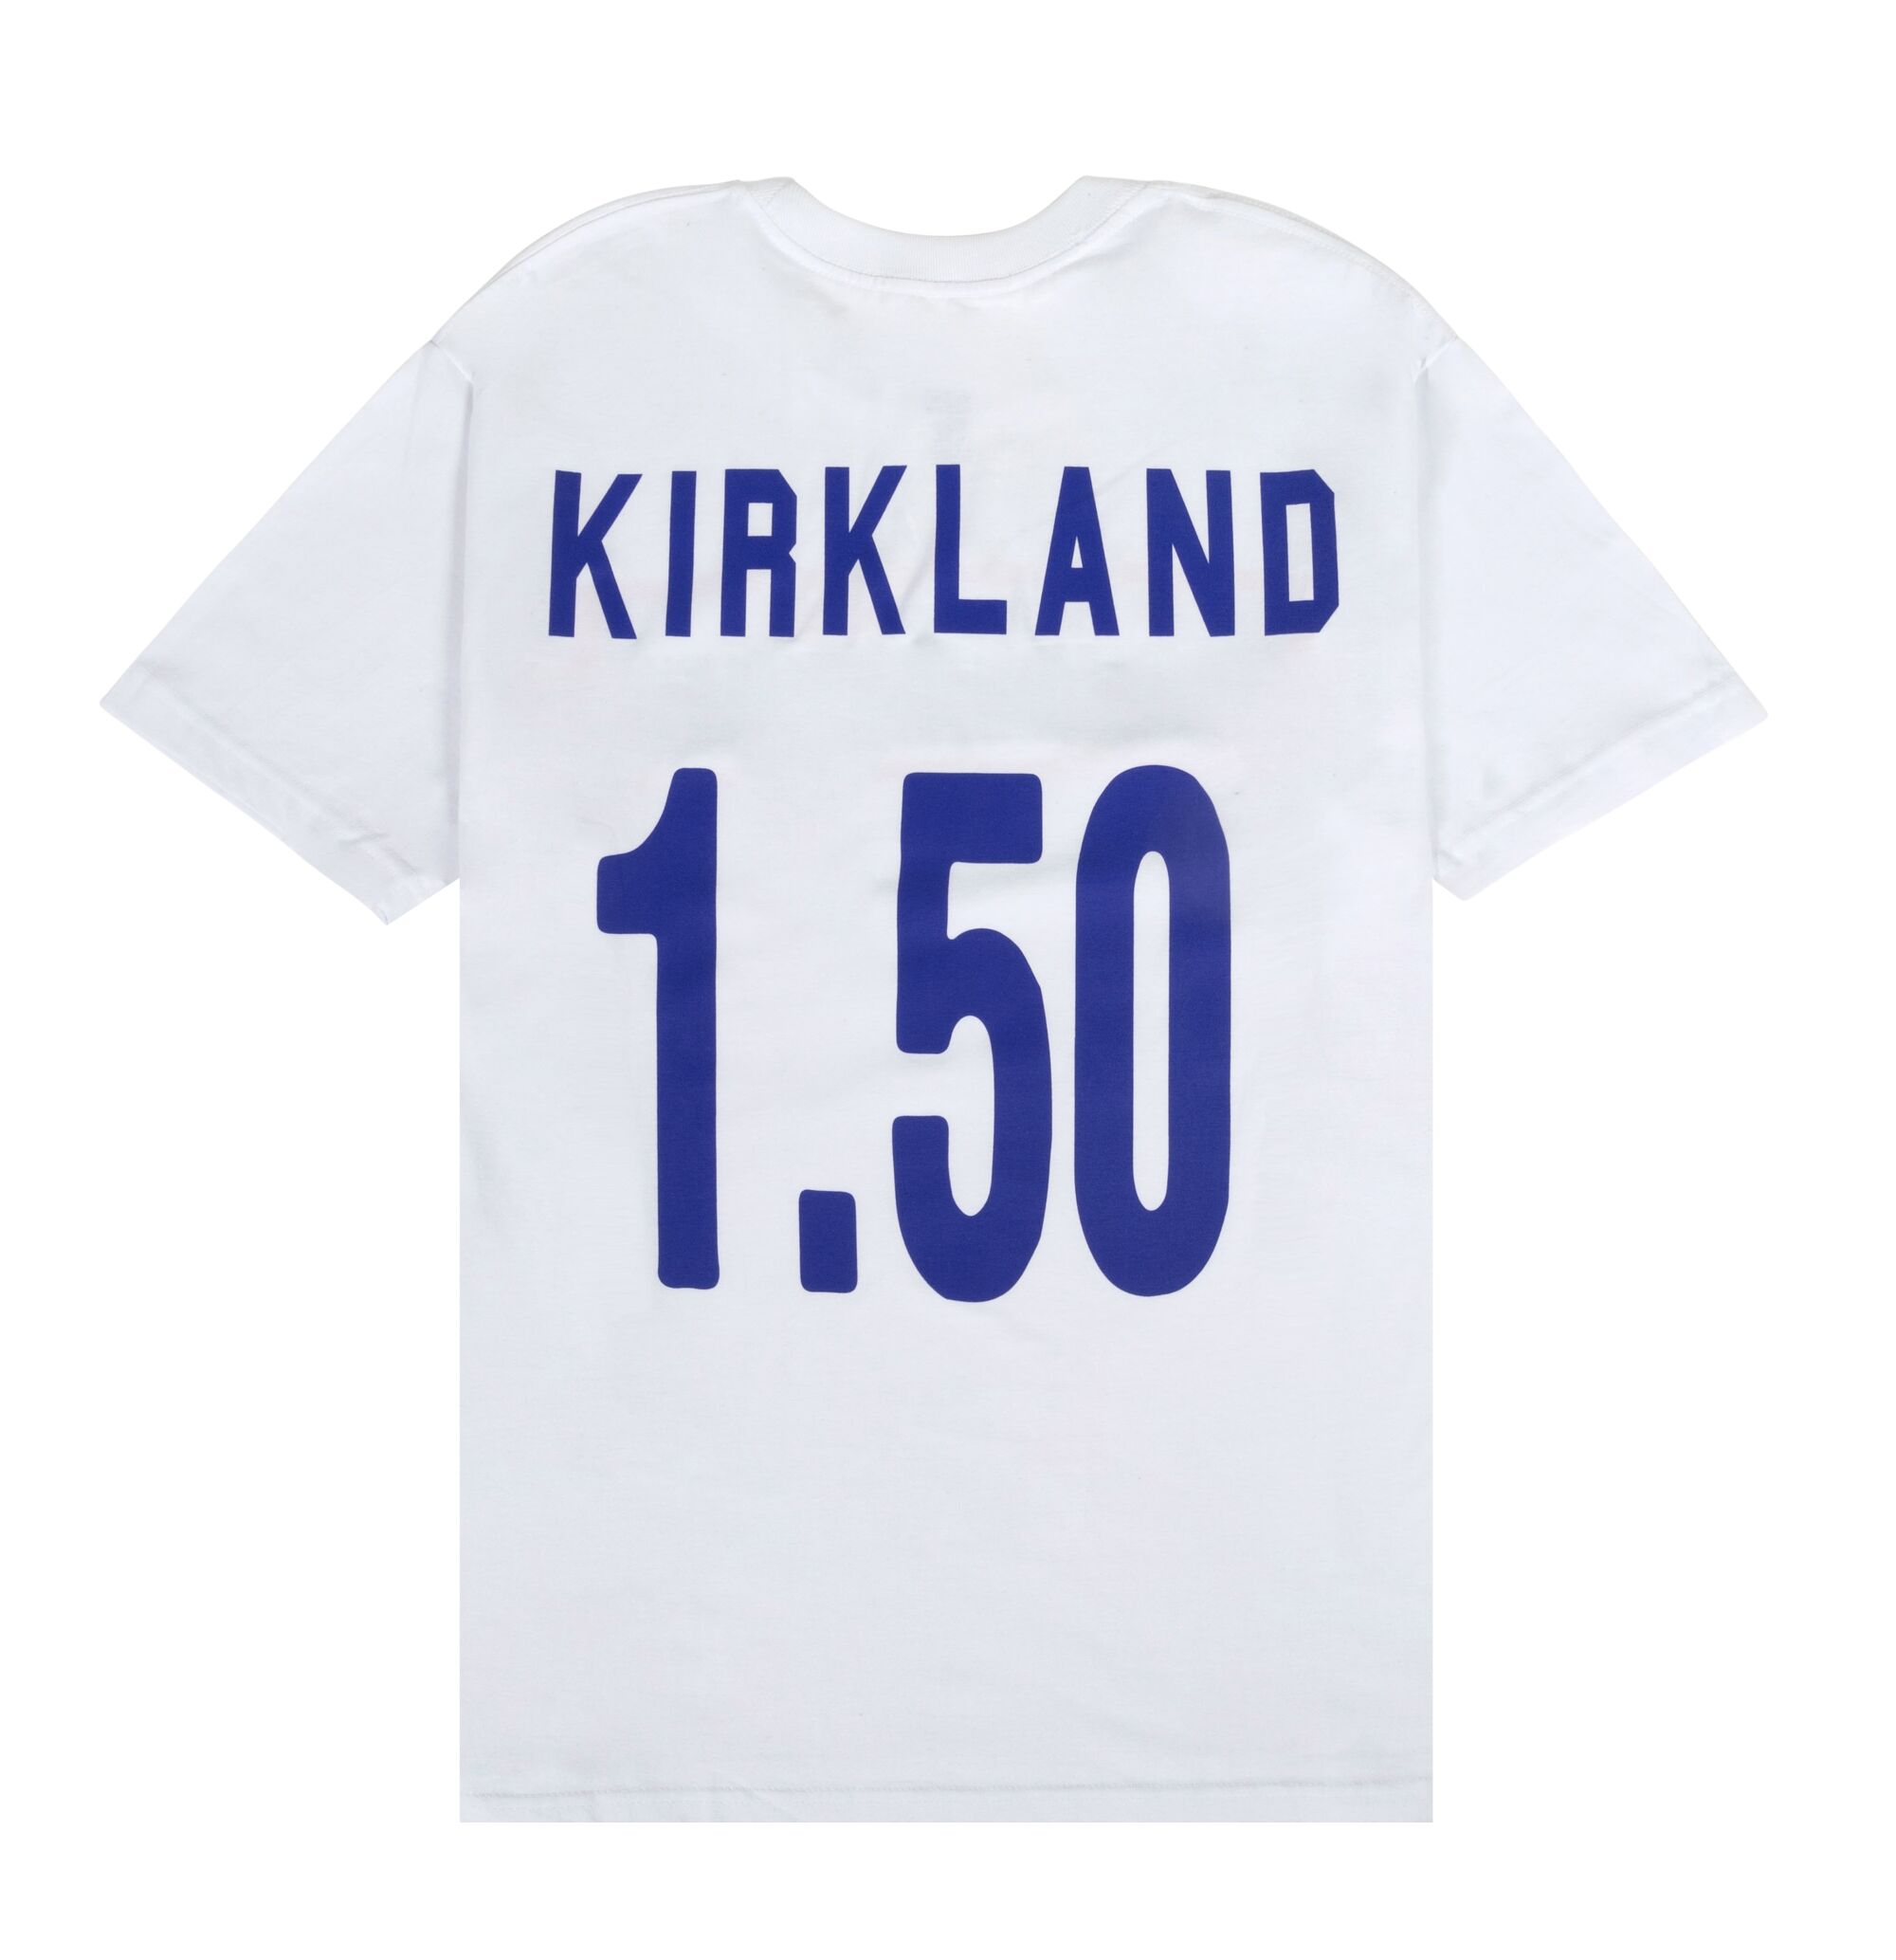 White tee pays homage to Costco’s $1.50 hot dogs with "1.50" in blue type